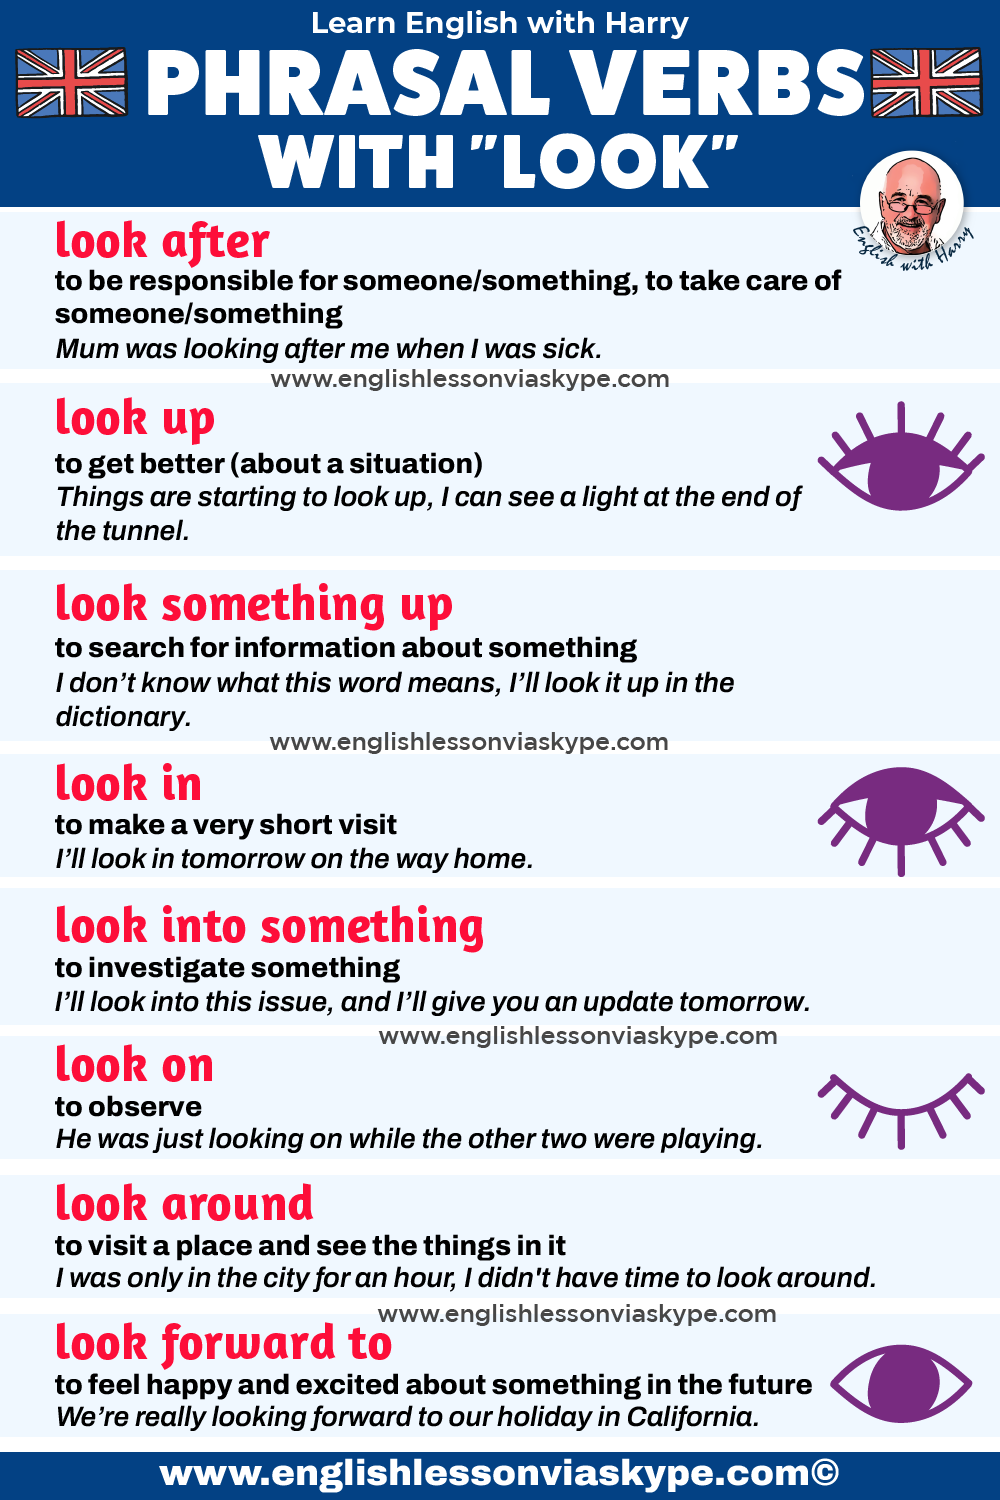 Phrasal verbs with look. Online English lessons on Zoom and Skype. Click the links and book your miễn phí trial lesson at englishlessonviaskype.com #learnenglish